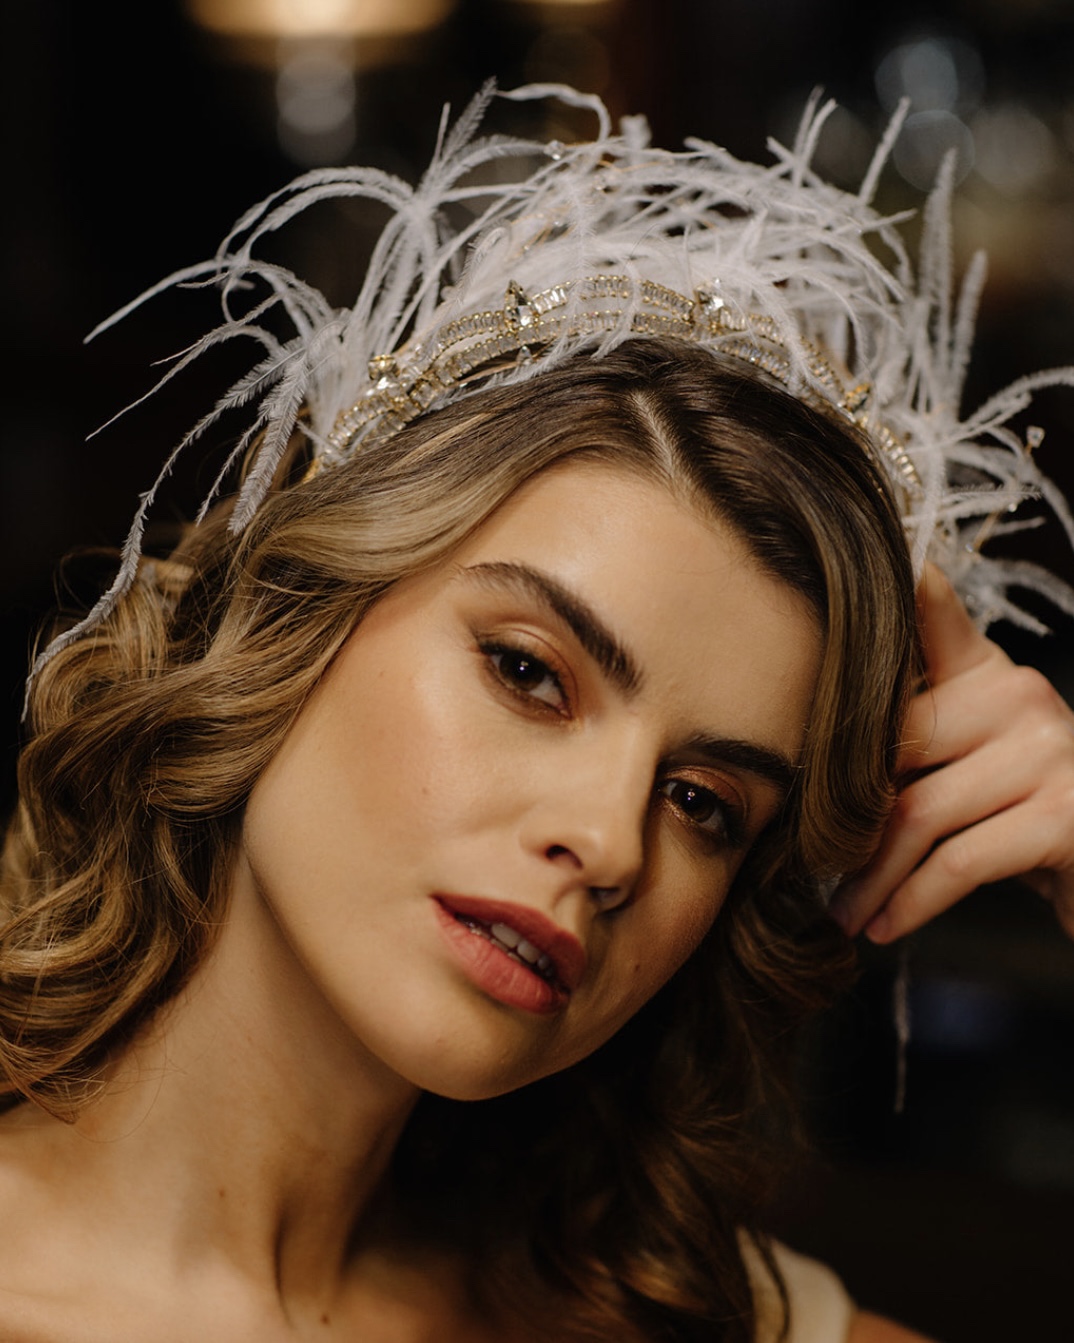 Camille Headpieces - Independent UK bridal designs